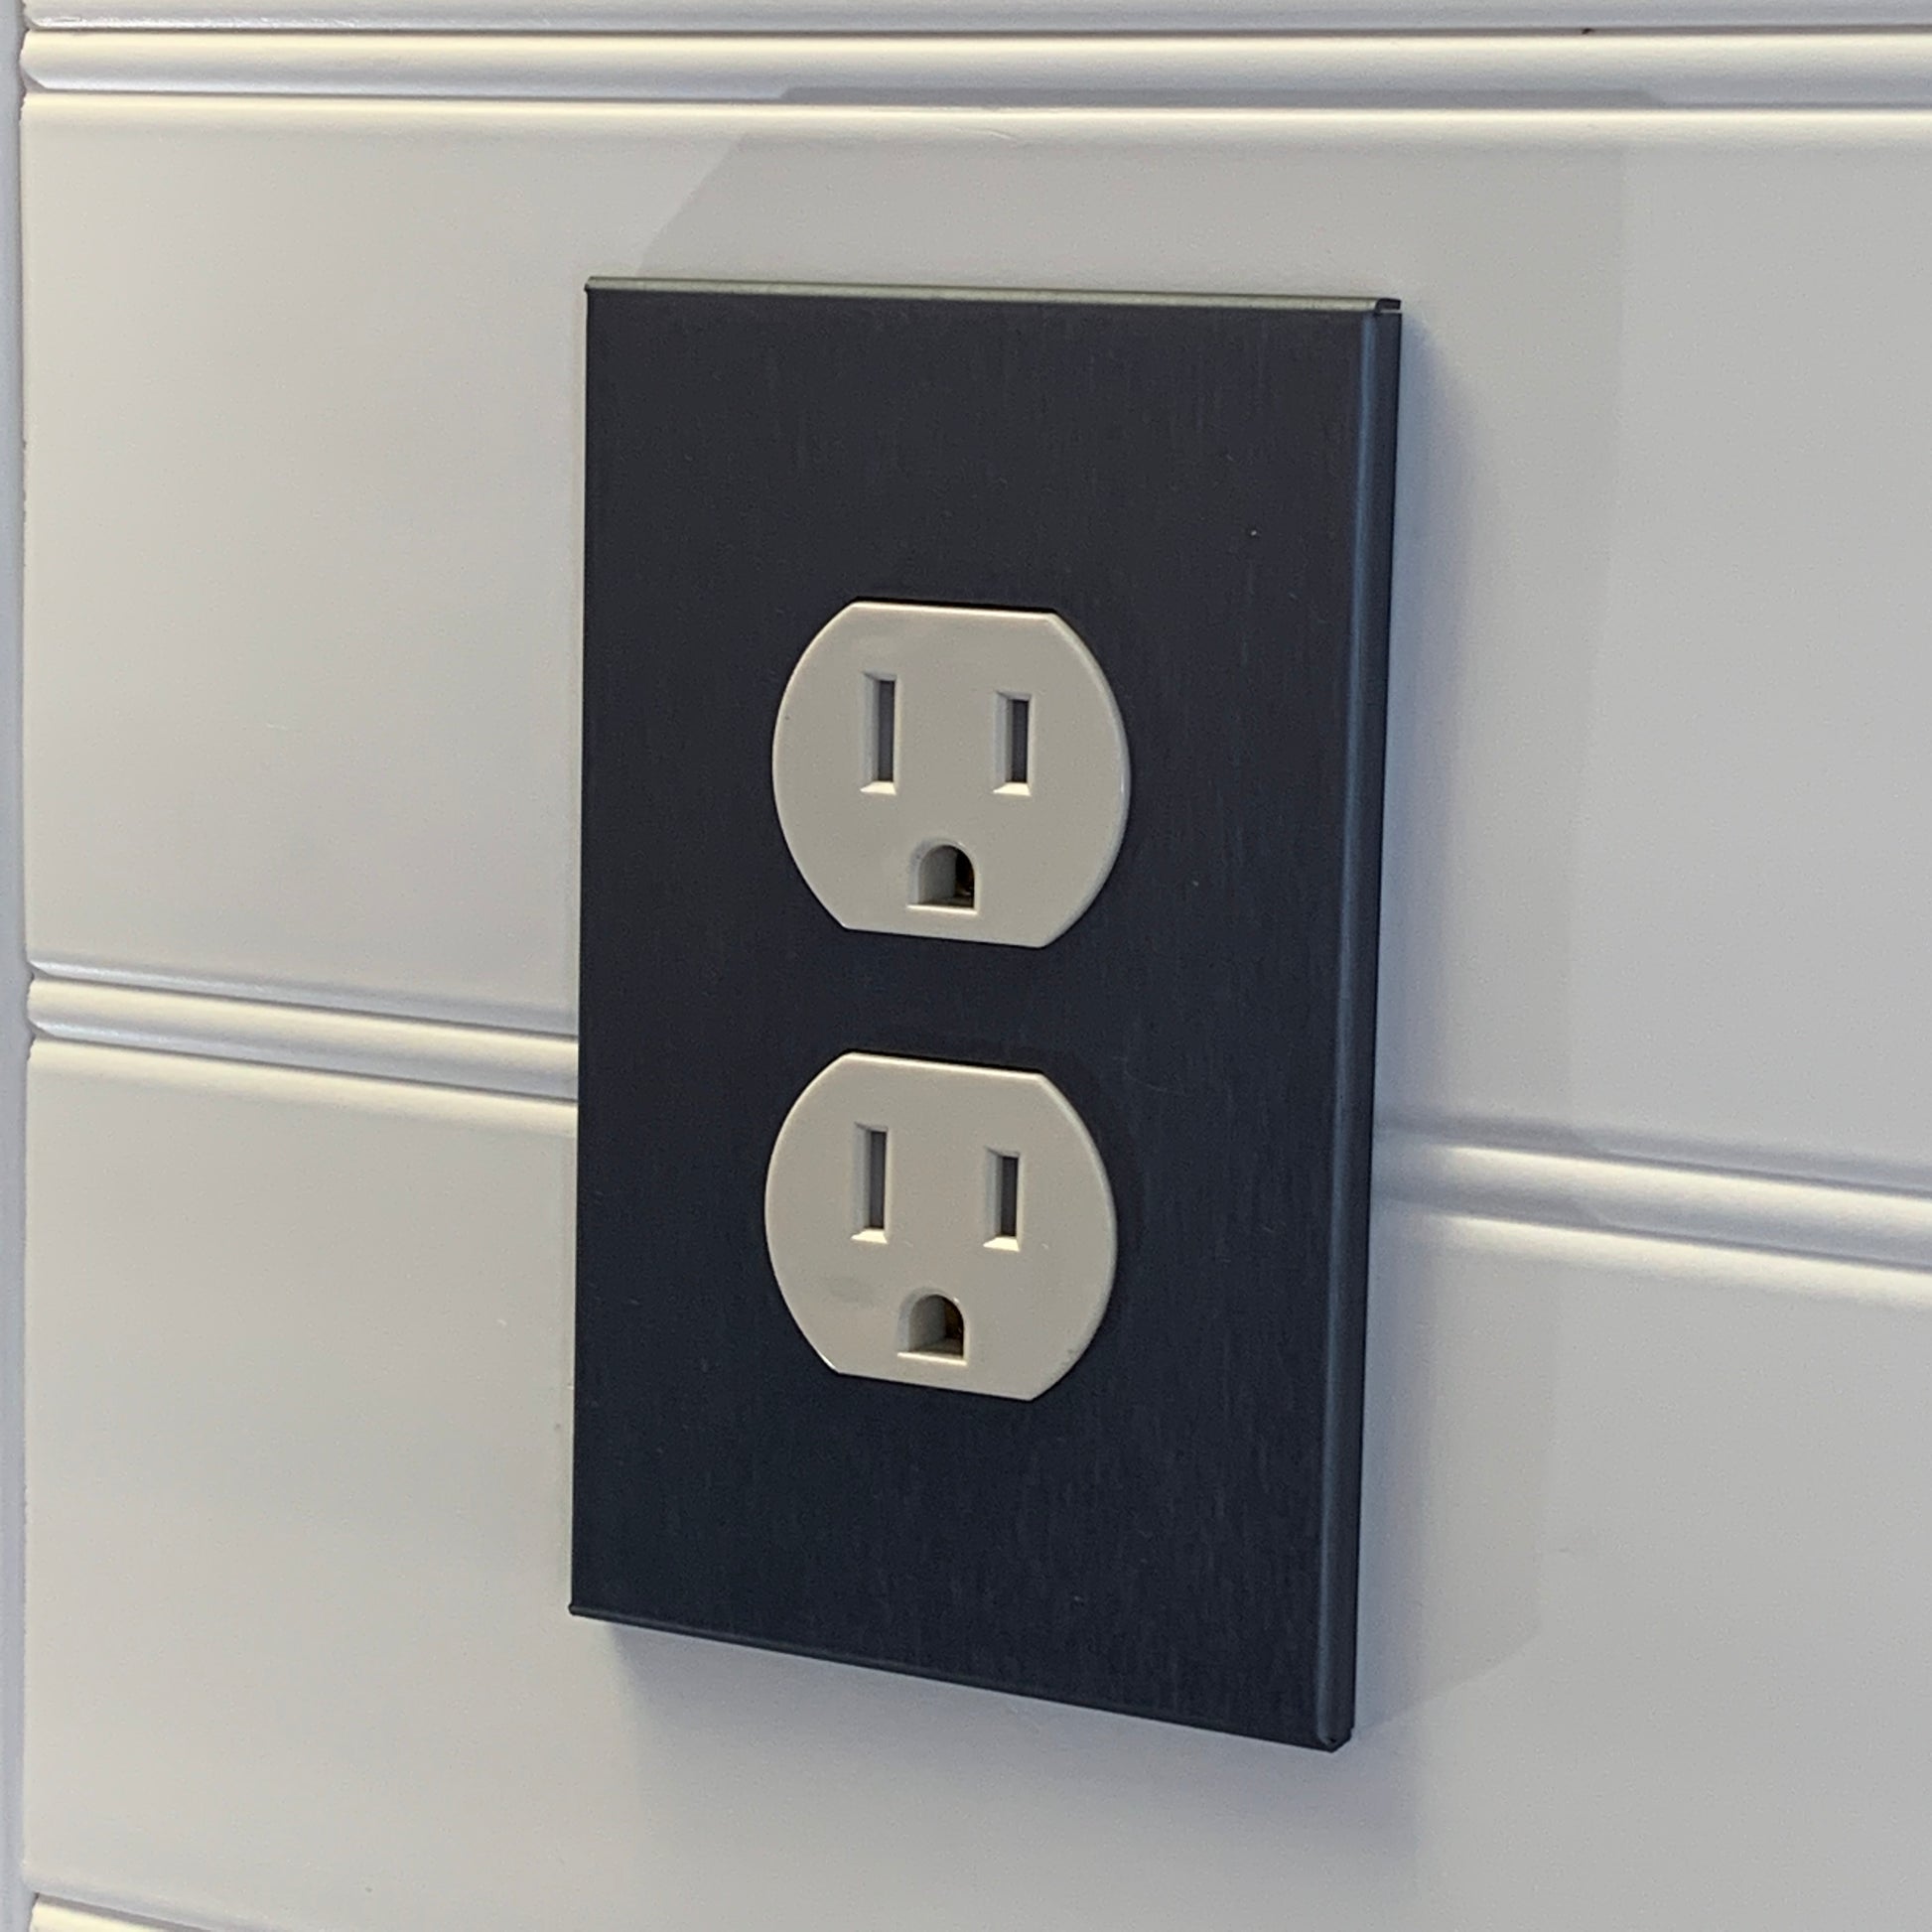 CleanPlate Classic Wall Plate in Designer Gray | Electrical Outlet